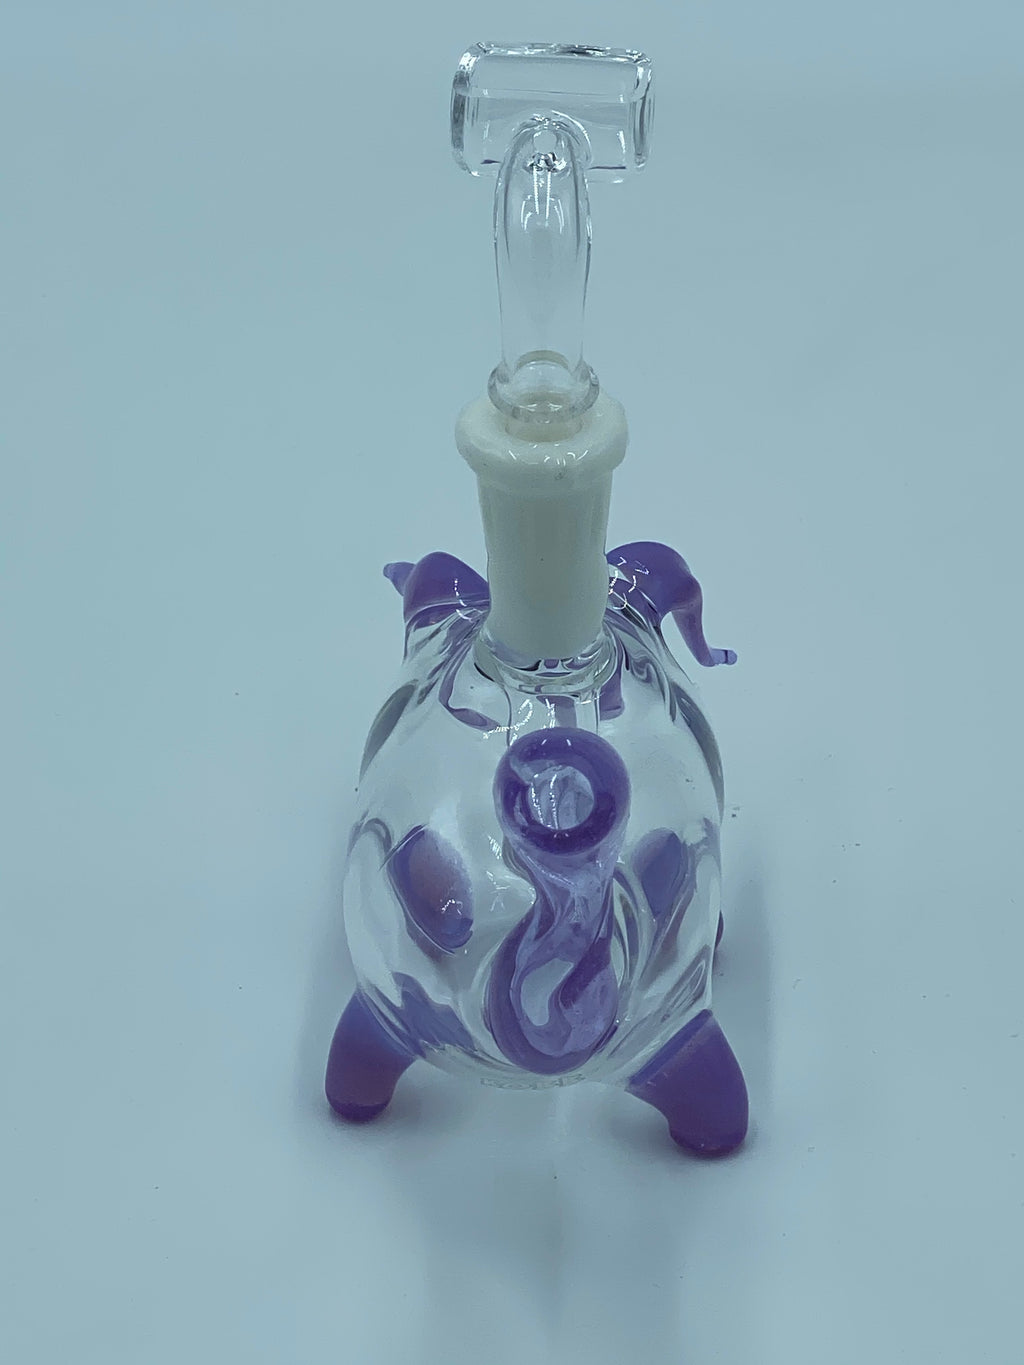 KOBB GLASS PIG RIG - Smoke Country - Land of the artistic glass blown bongs